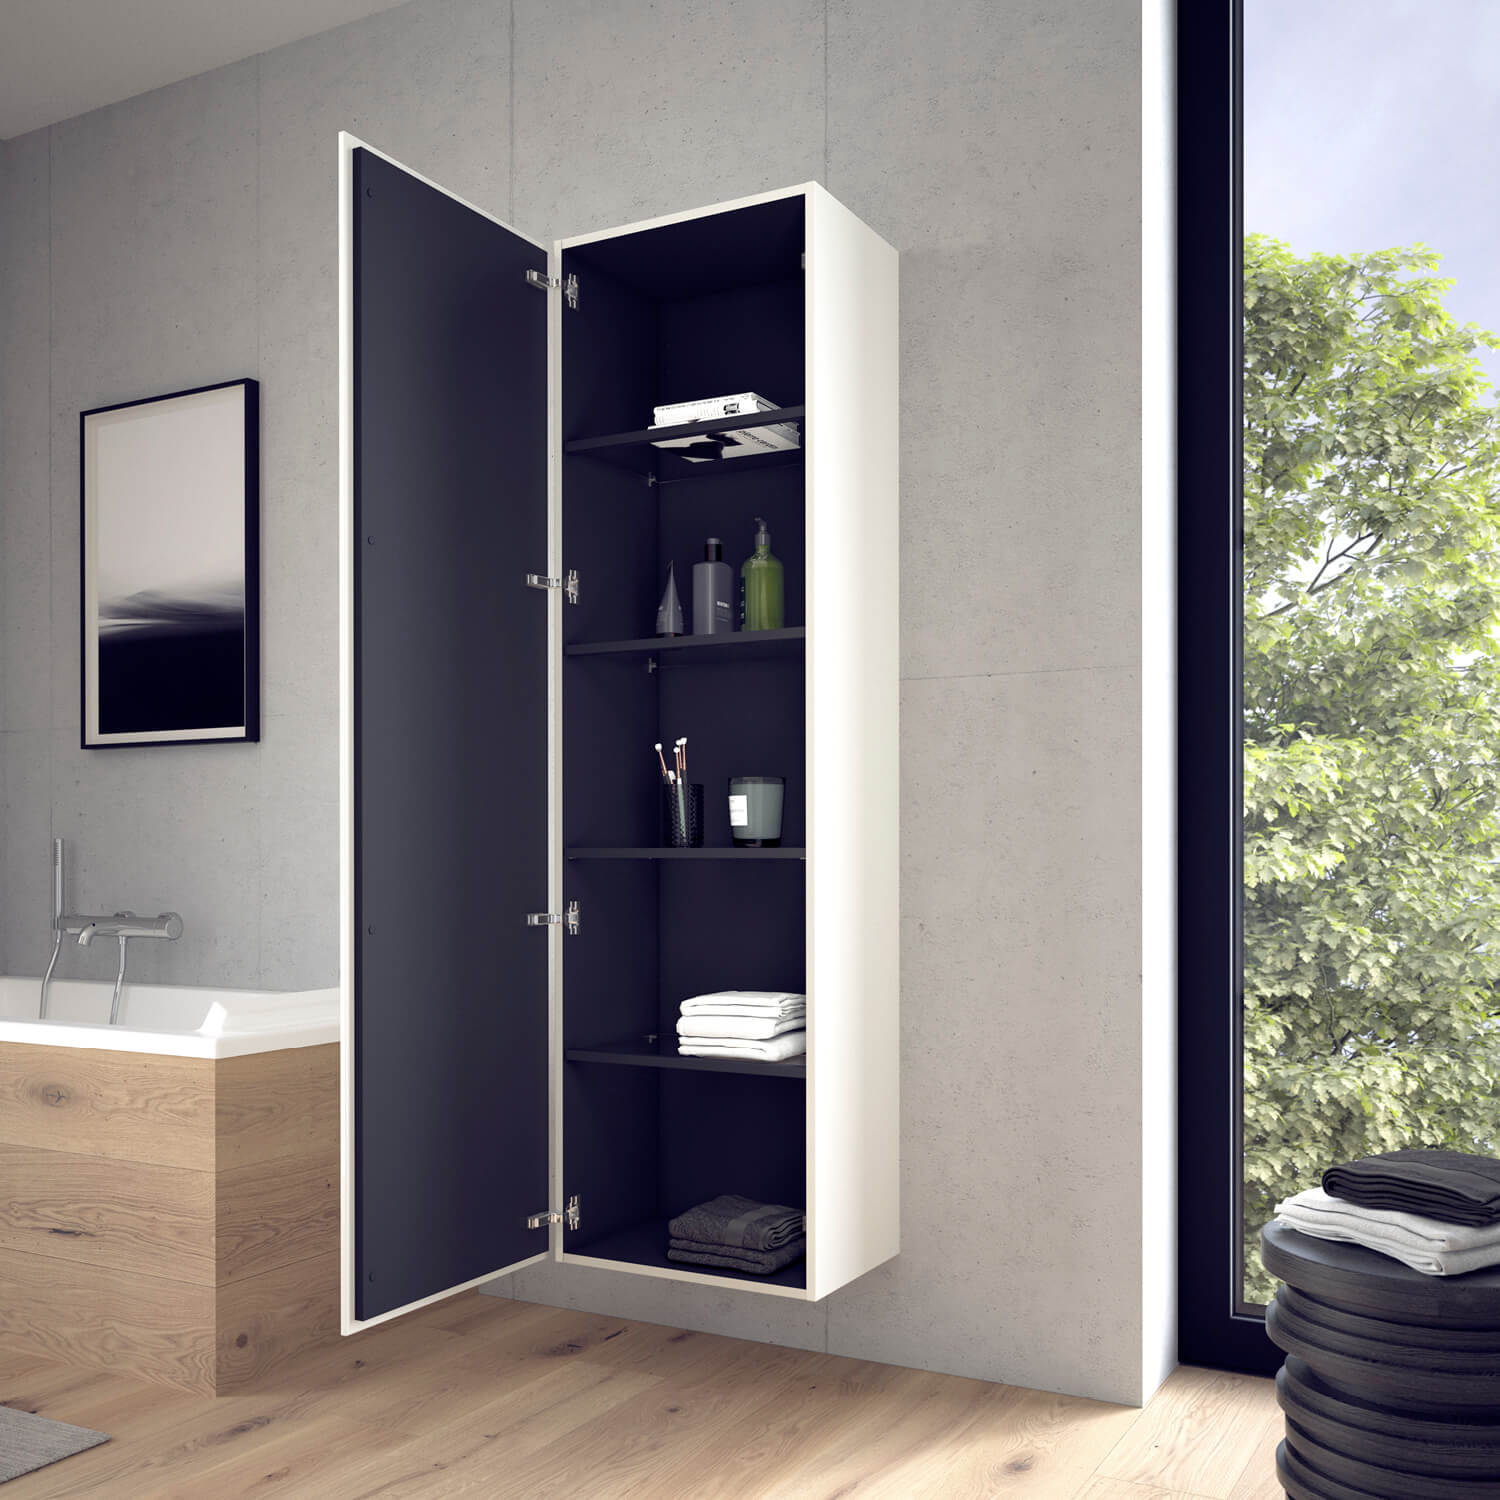 L-Cube tall cabinet with tidy design from the inside
